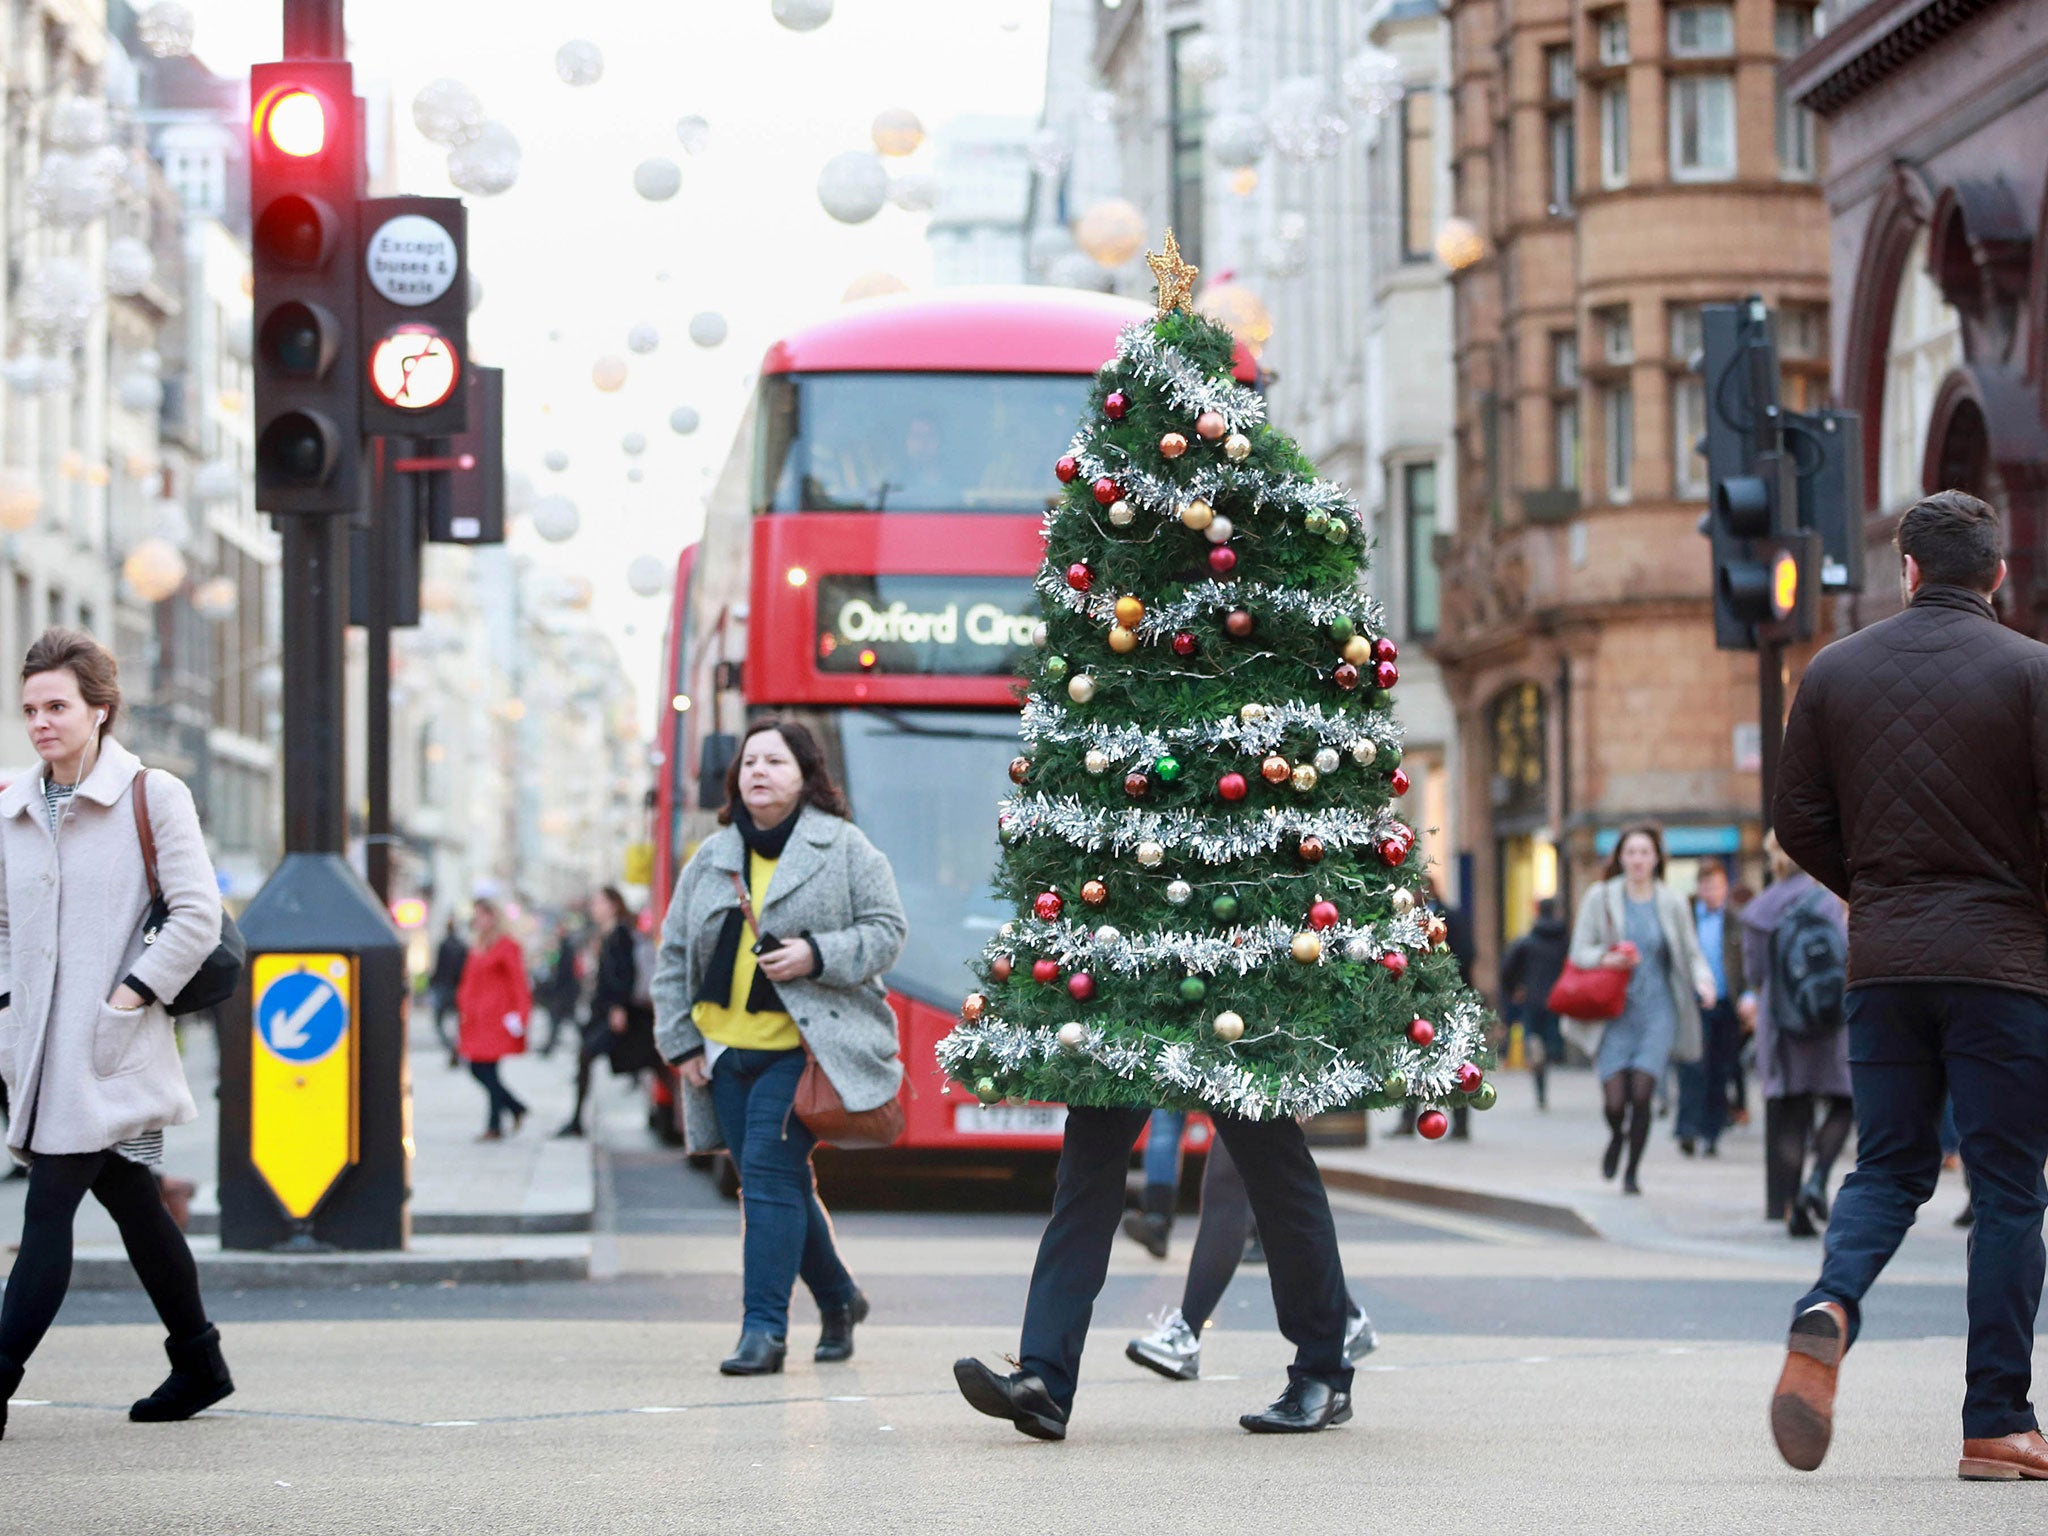 Festive cheer on Oxford Street, the capital’s shopping hub. But retailers fear that rising sales are being achieved at the cost of profits amid steep discounts